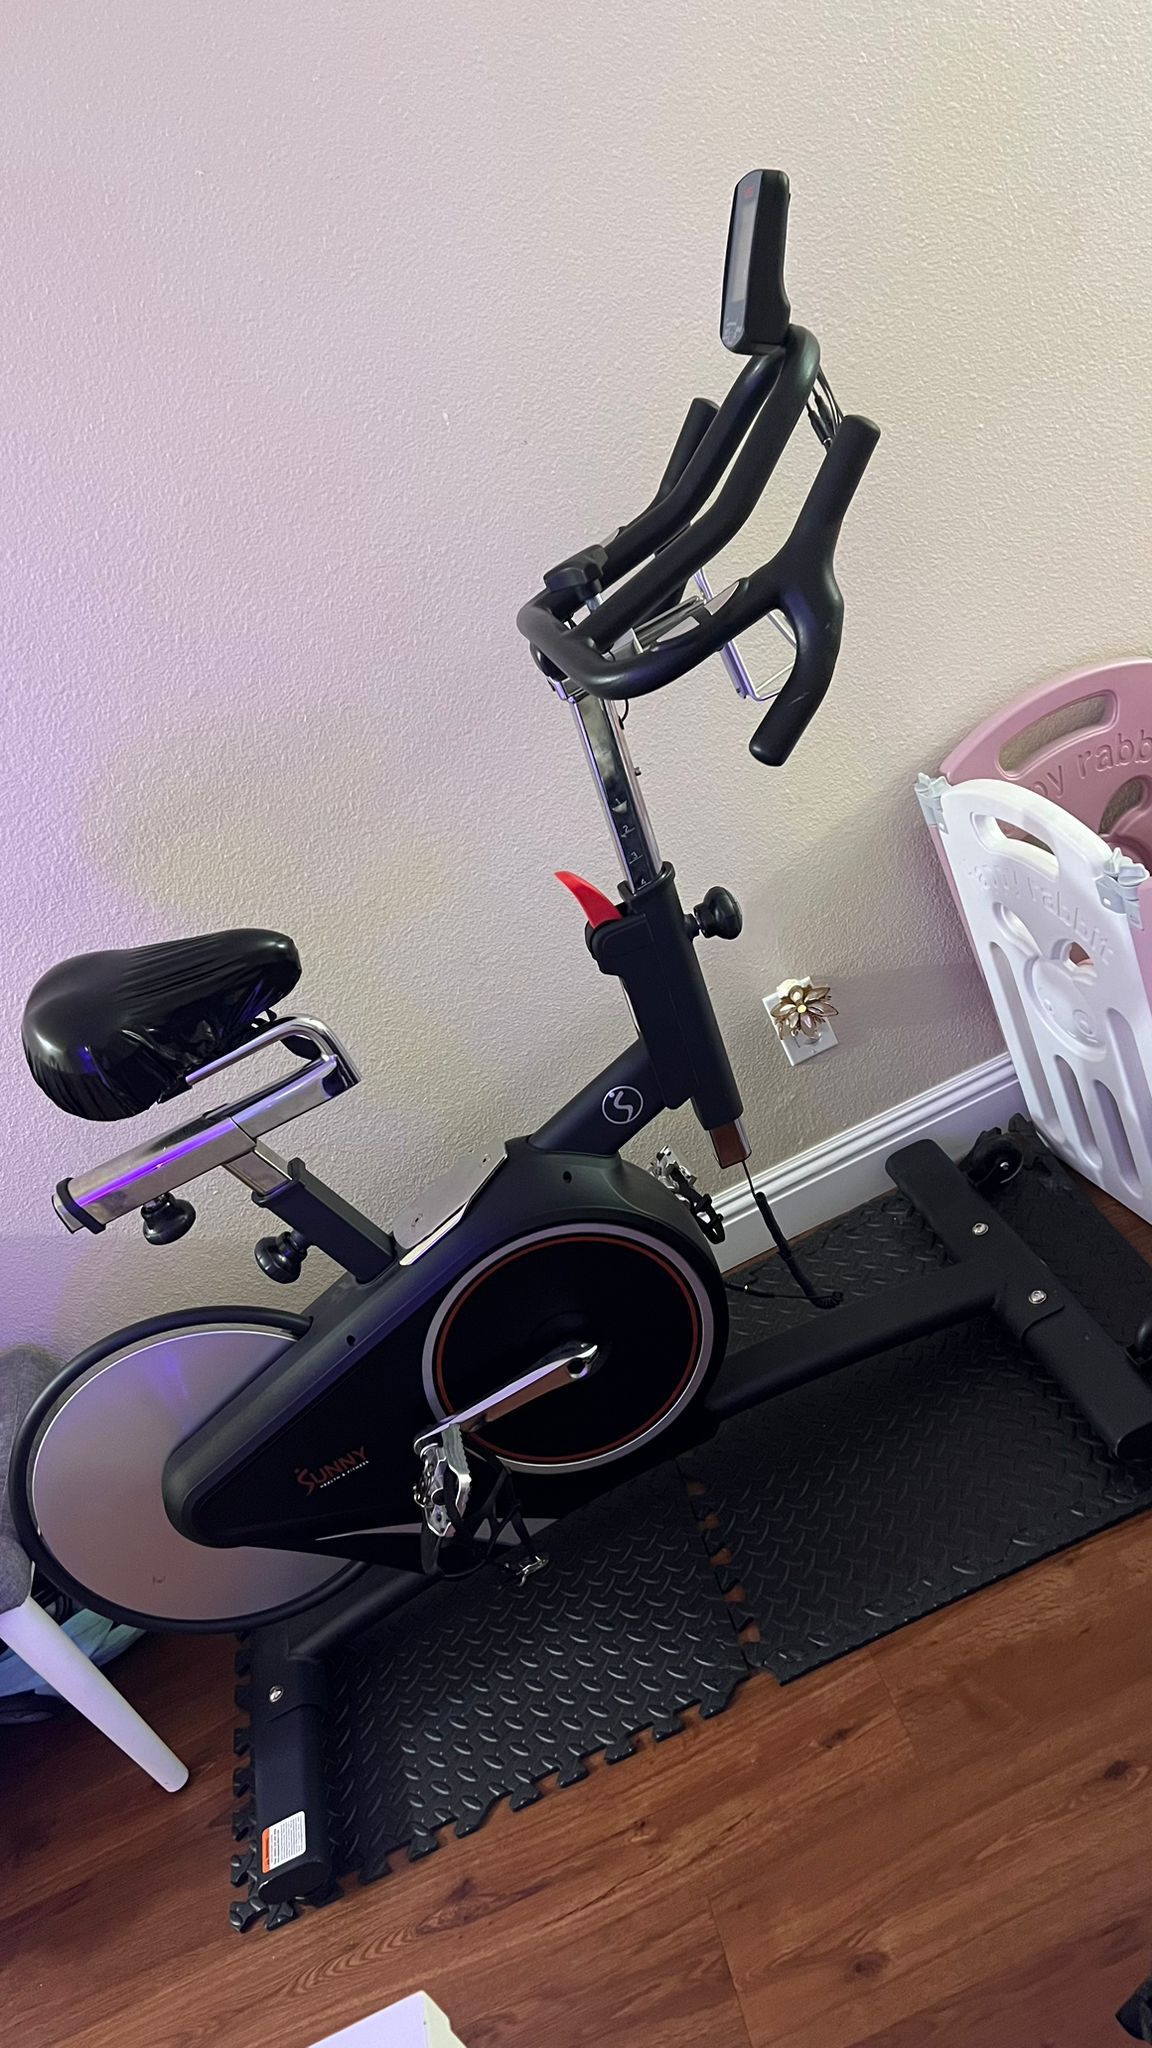 Recycling exercise bike